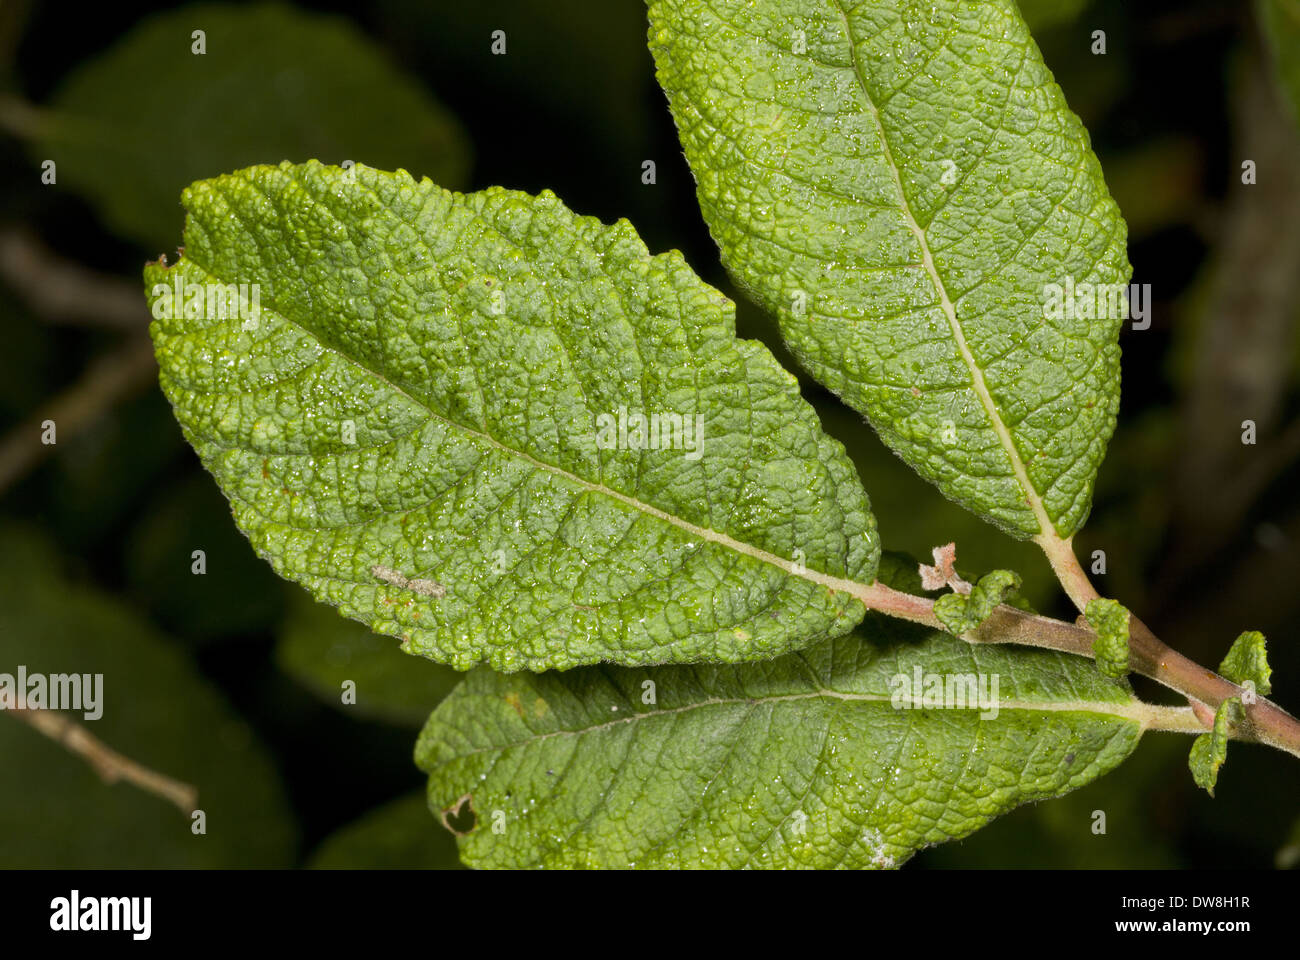 Eared Willow (Salix aurita) close-up of wrinkled leaves and persistent stipules Devon England September Stock Photo